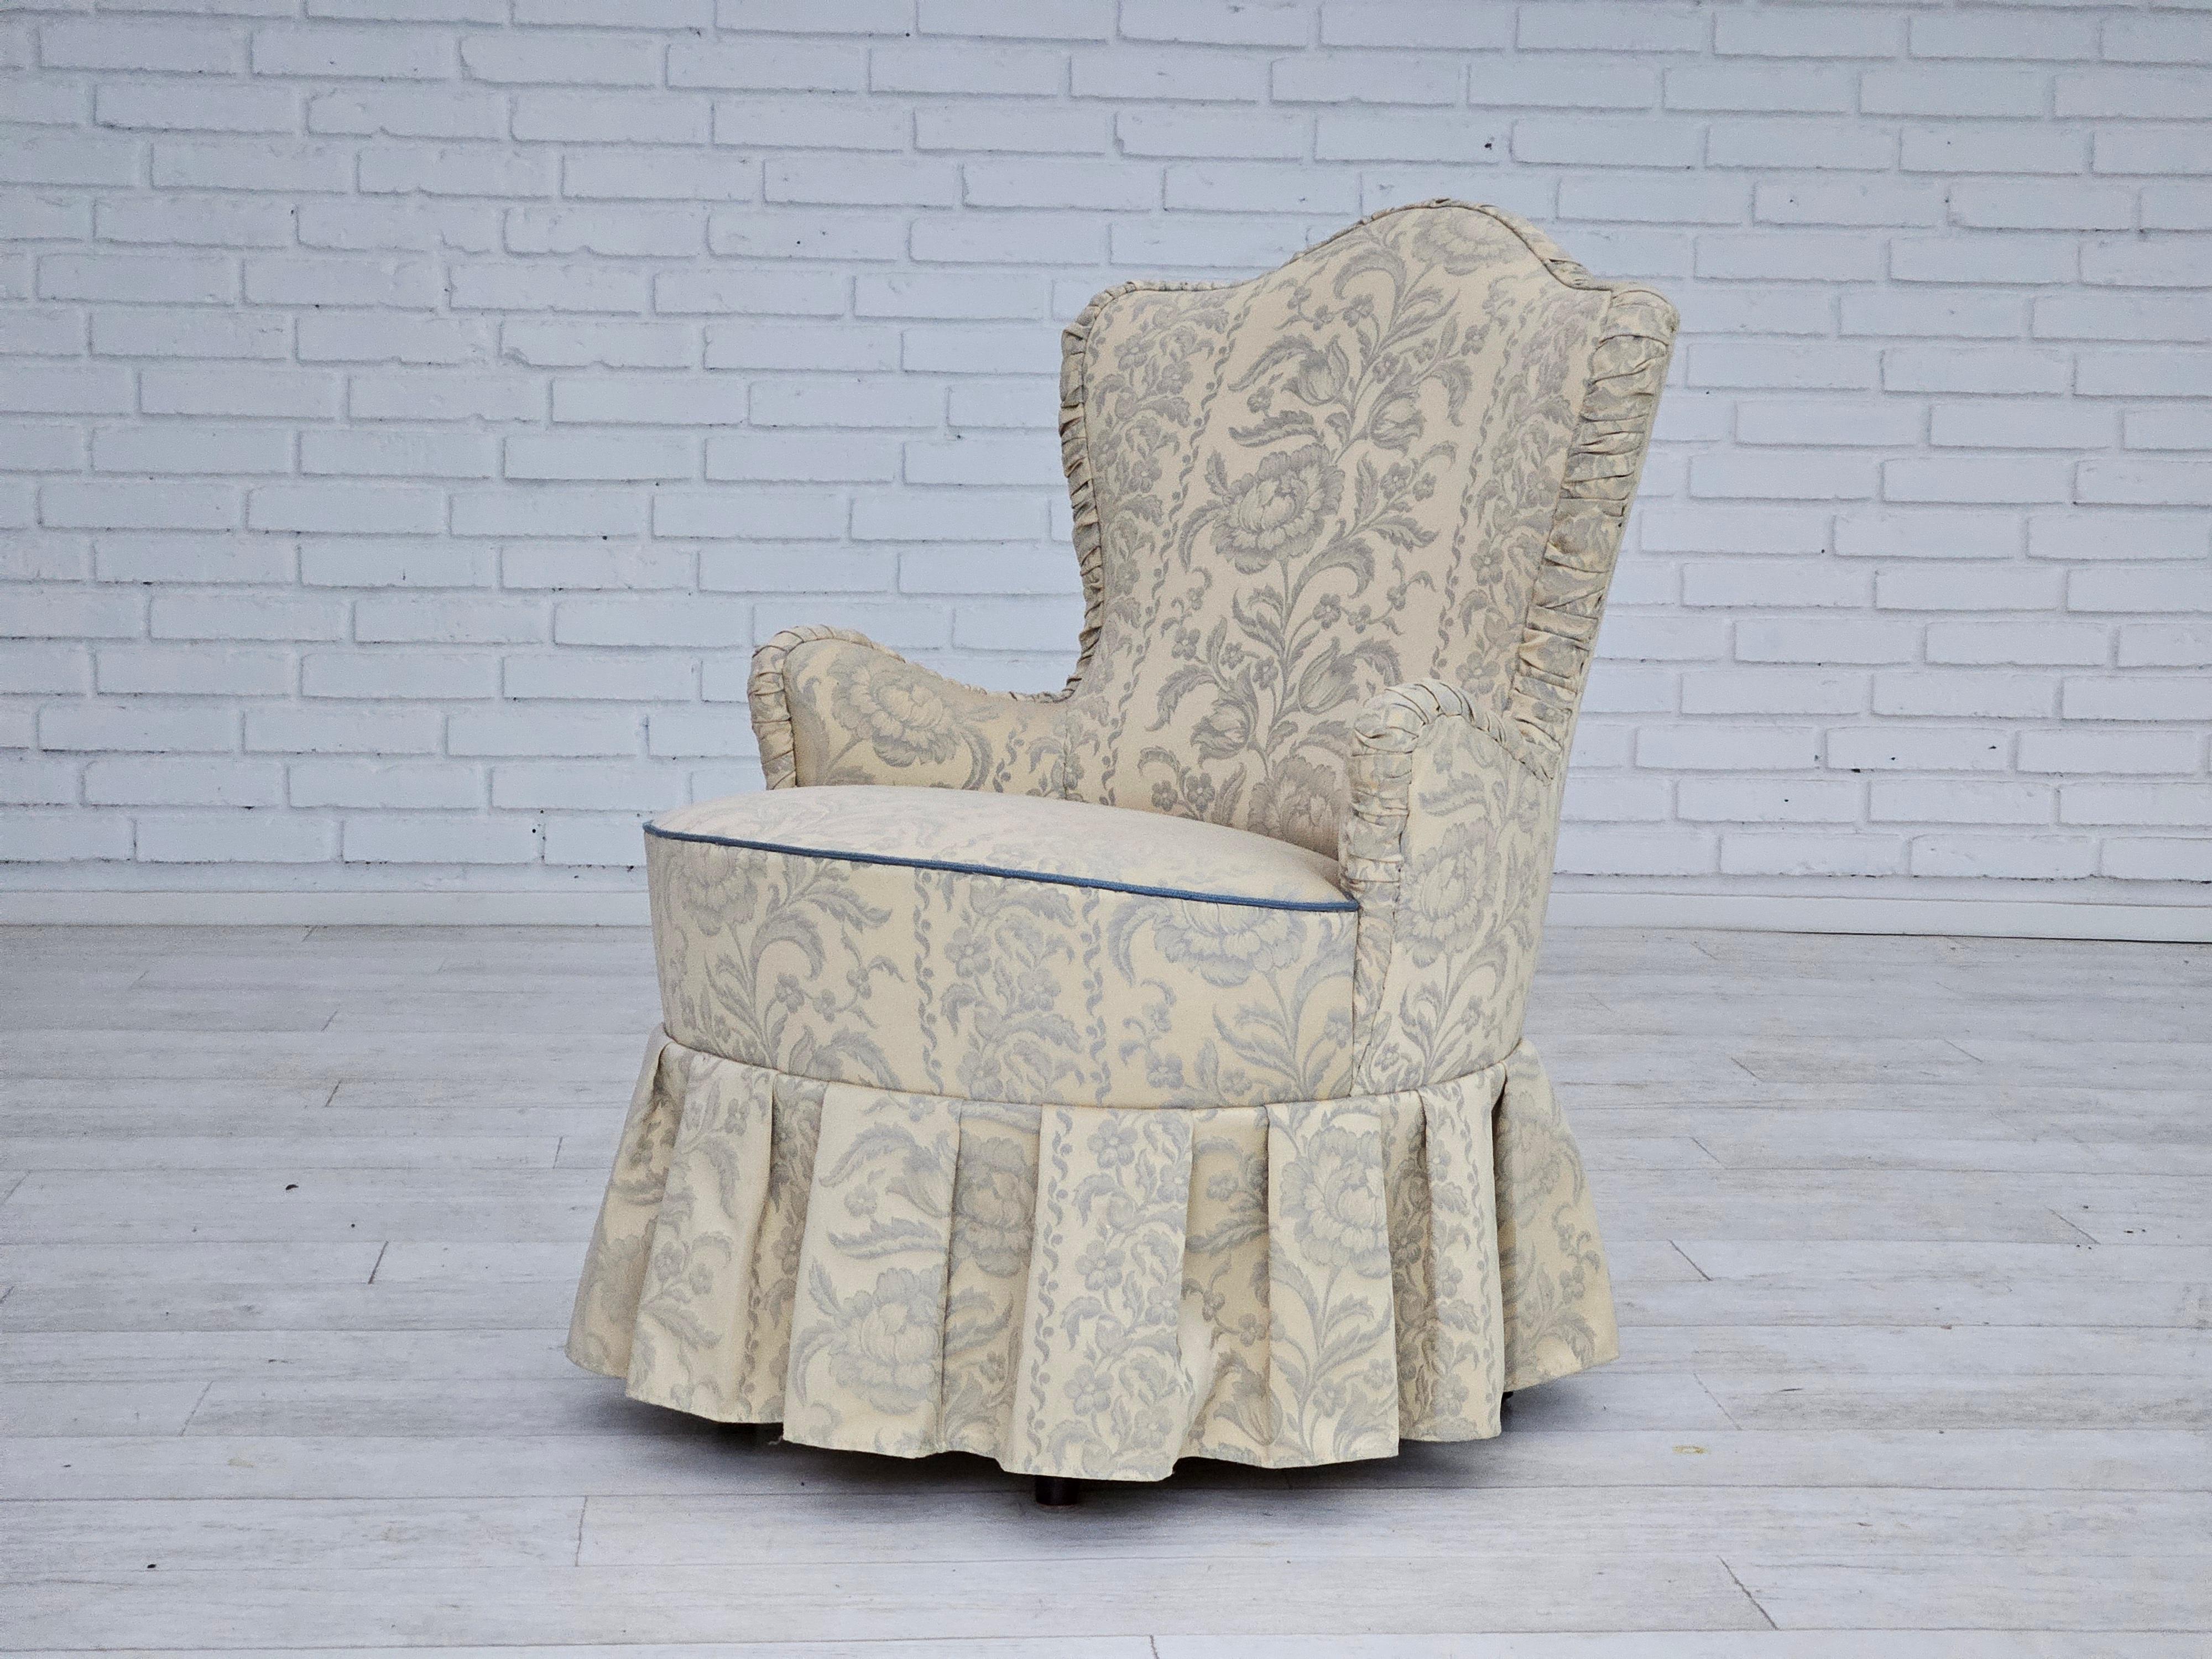 1950s, fauteuil Whiting, reupholstered, creamy/white floral fabric. en vente 9